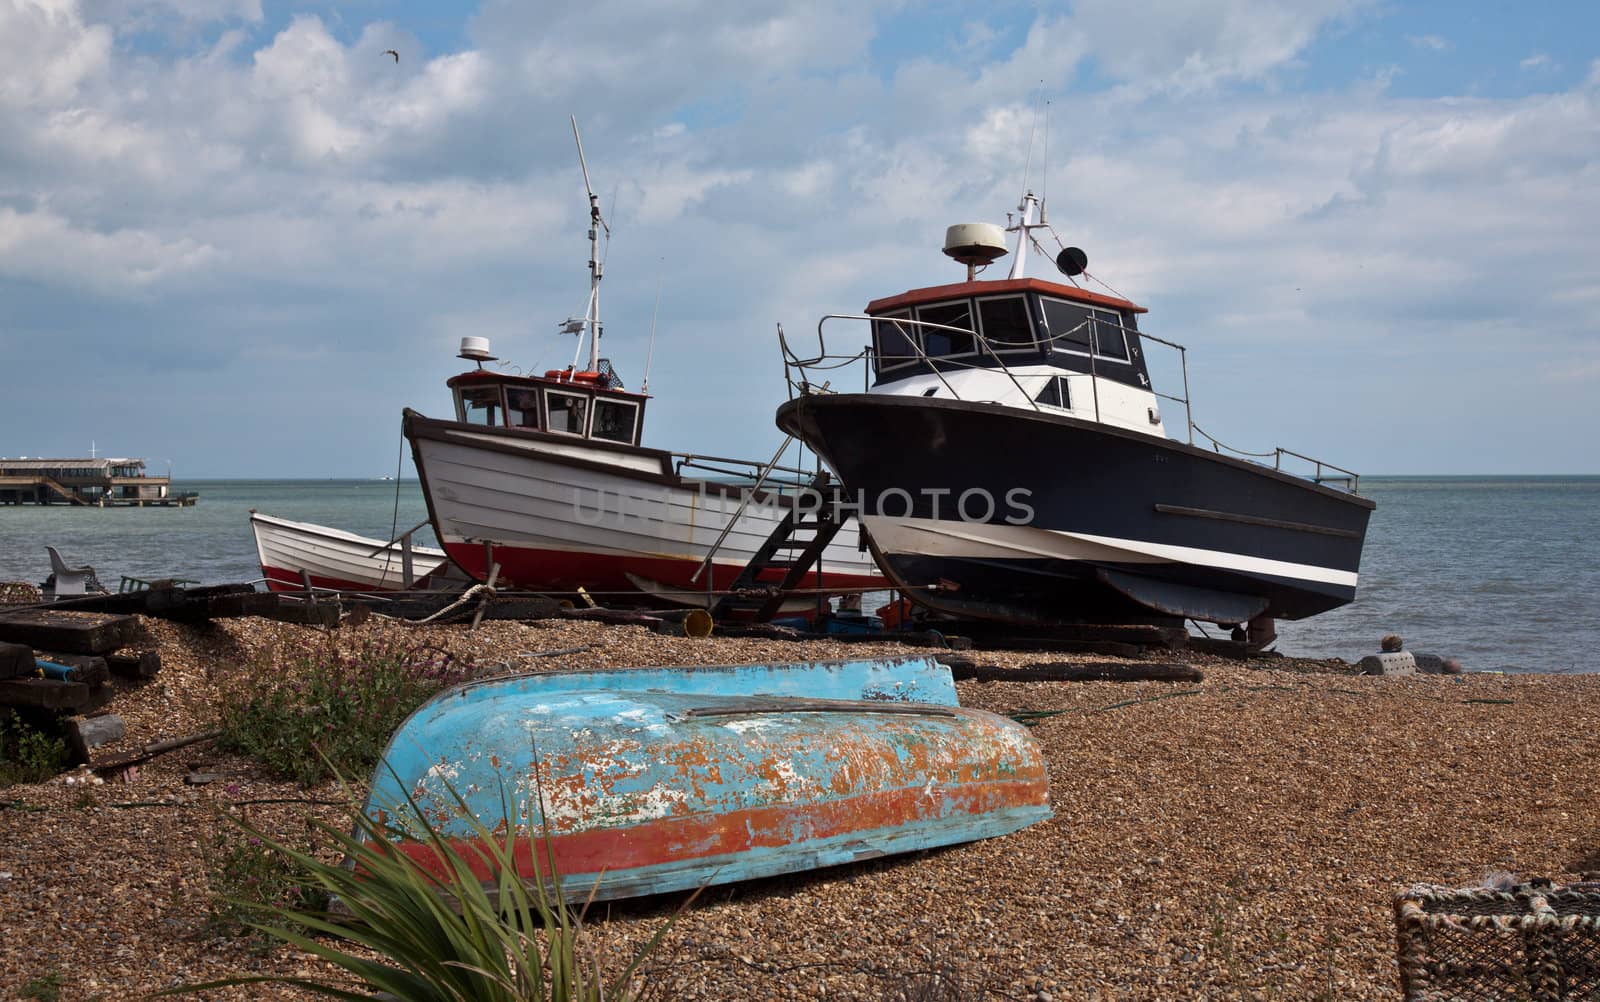 Old boats on Deal Beach by steheap